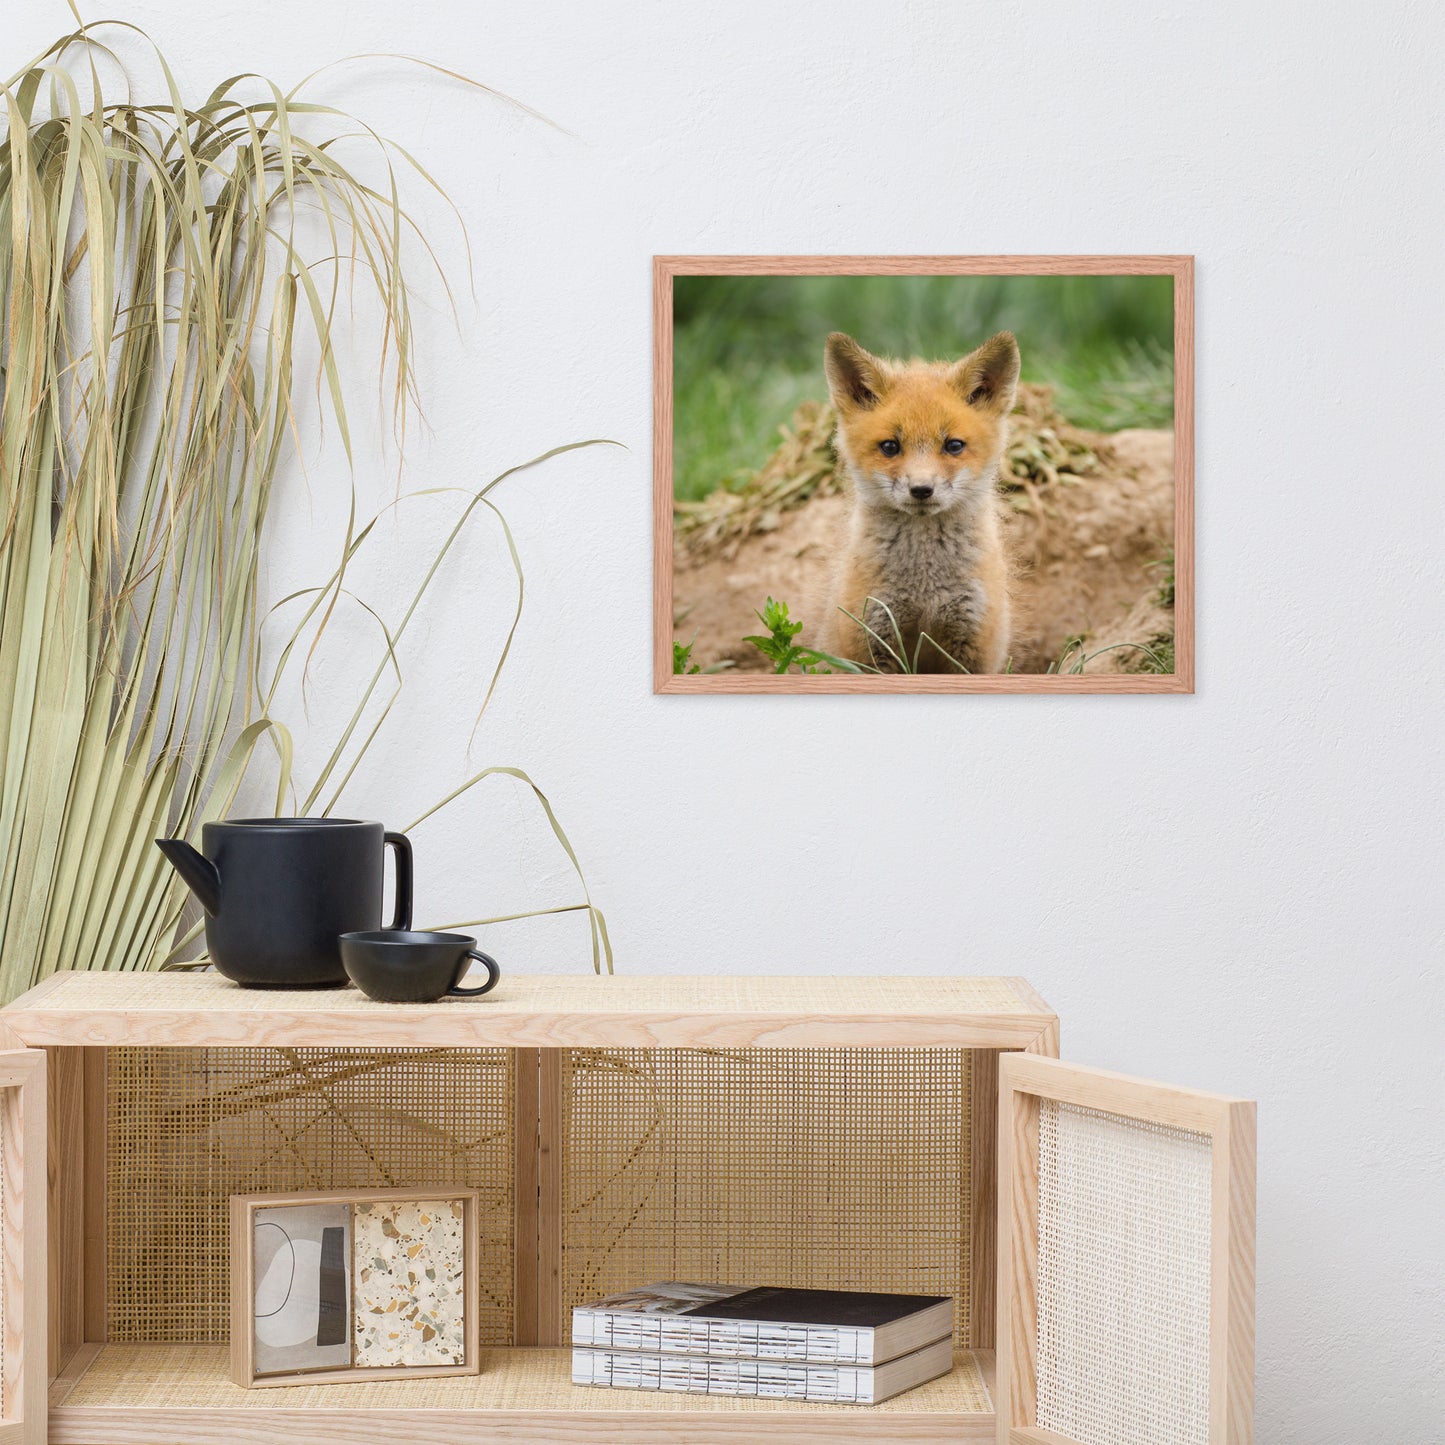 Shower Room Prints: Baby Young Red Fox Kit/ Animal / Wildlife / Nature Photographic Artwork - Framed Artwork - Wall Decor